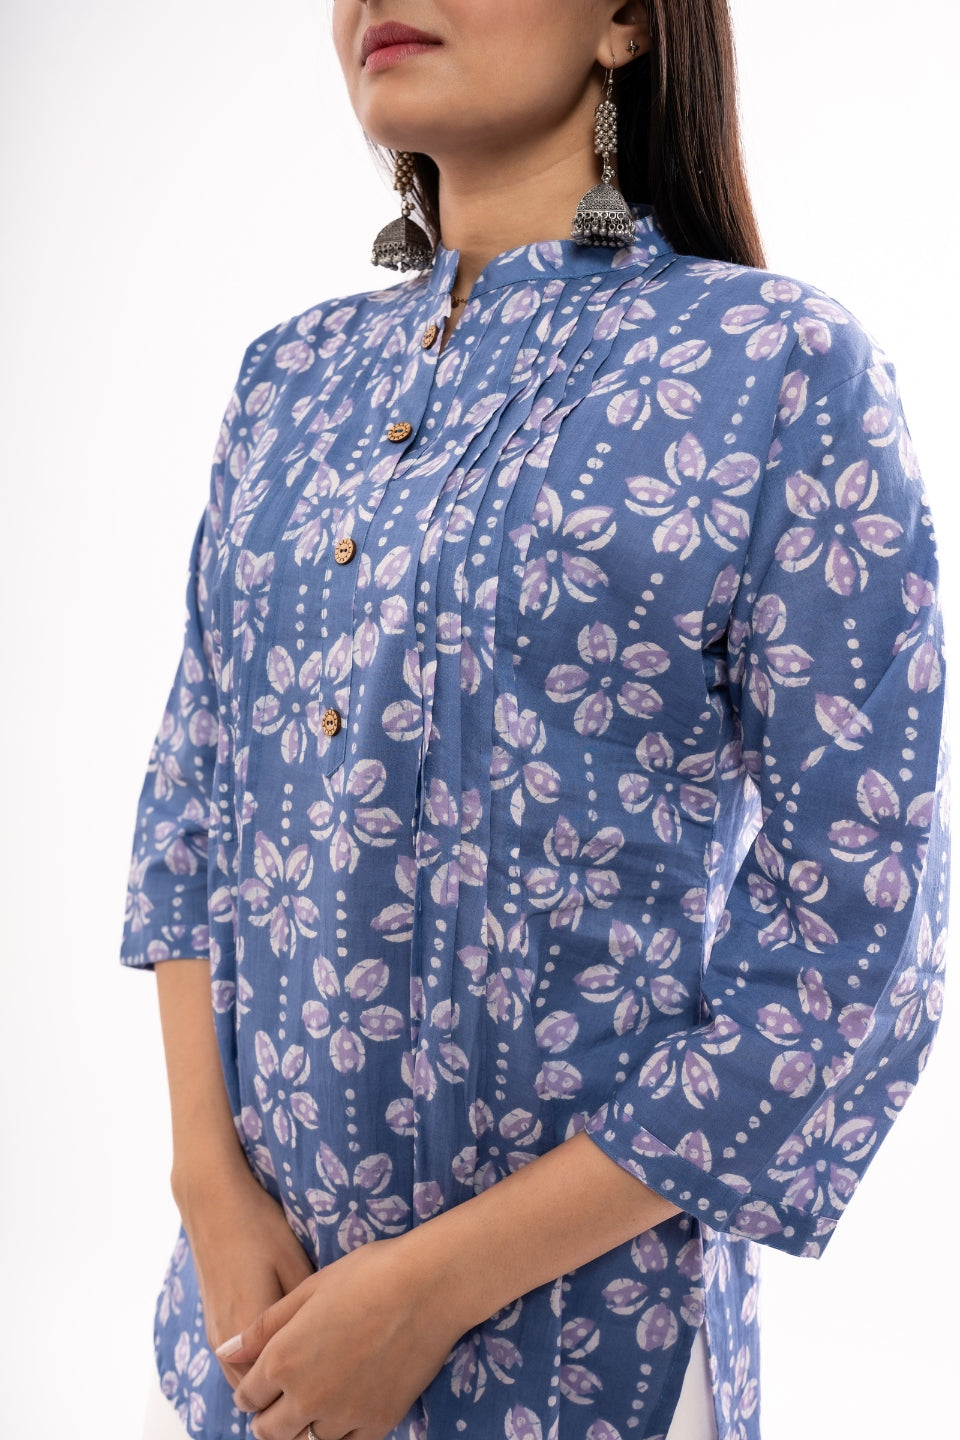 Ekisha's women blue floral printed cotton tunic top short kurti, another side view